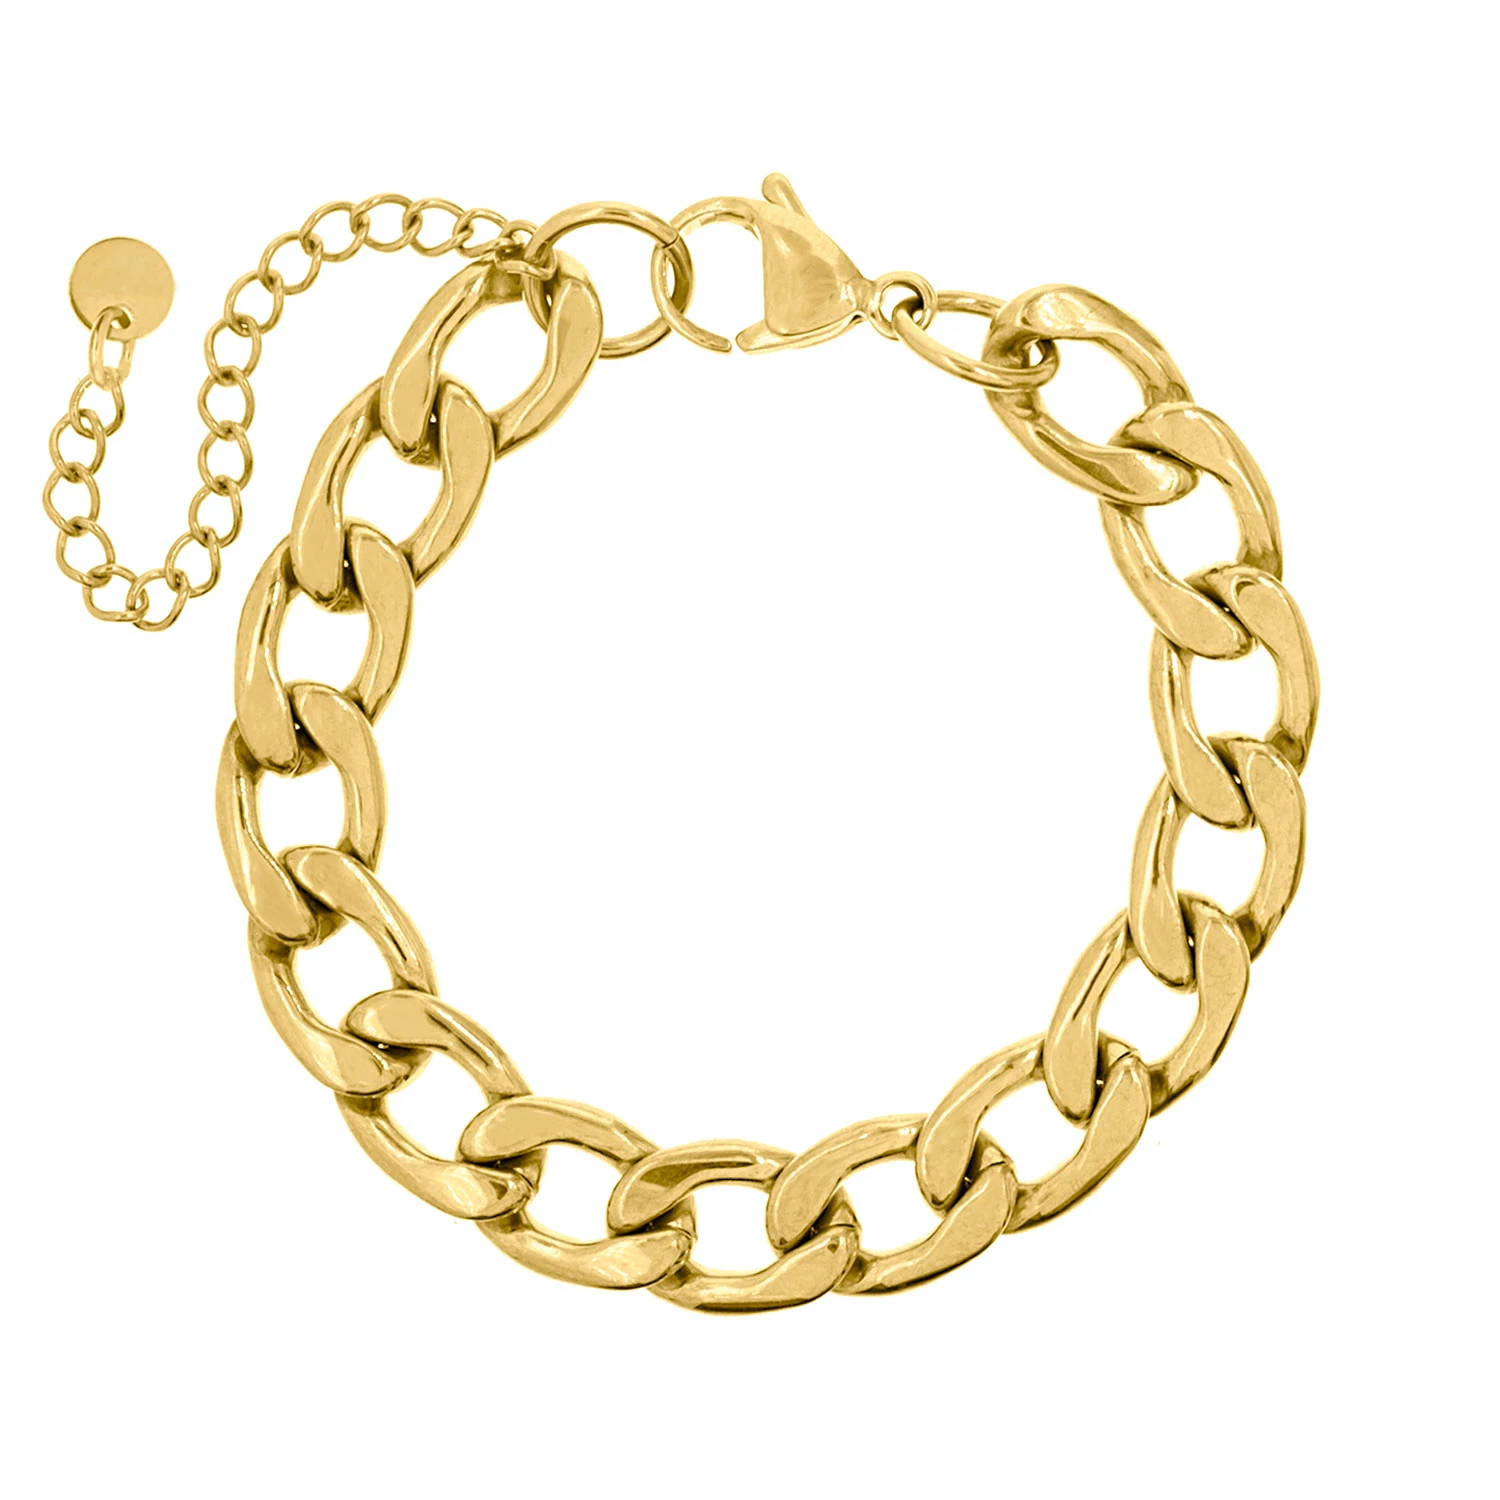 Stainless Steel Wide Heavy 18k Gold Plated Armband Chunky Chain Ladies Cuban Chain Bracelet With Tags - Buy Designer Ladies Bracelet,Gold Plated Curb Chain Bracelet,Curb Bracelets Product on Alibaba.com